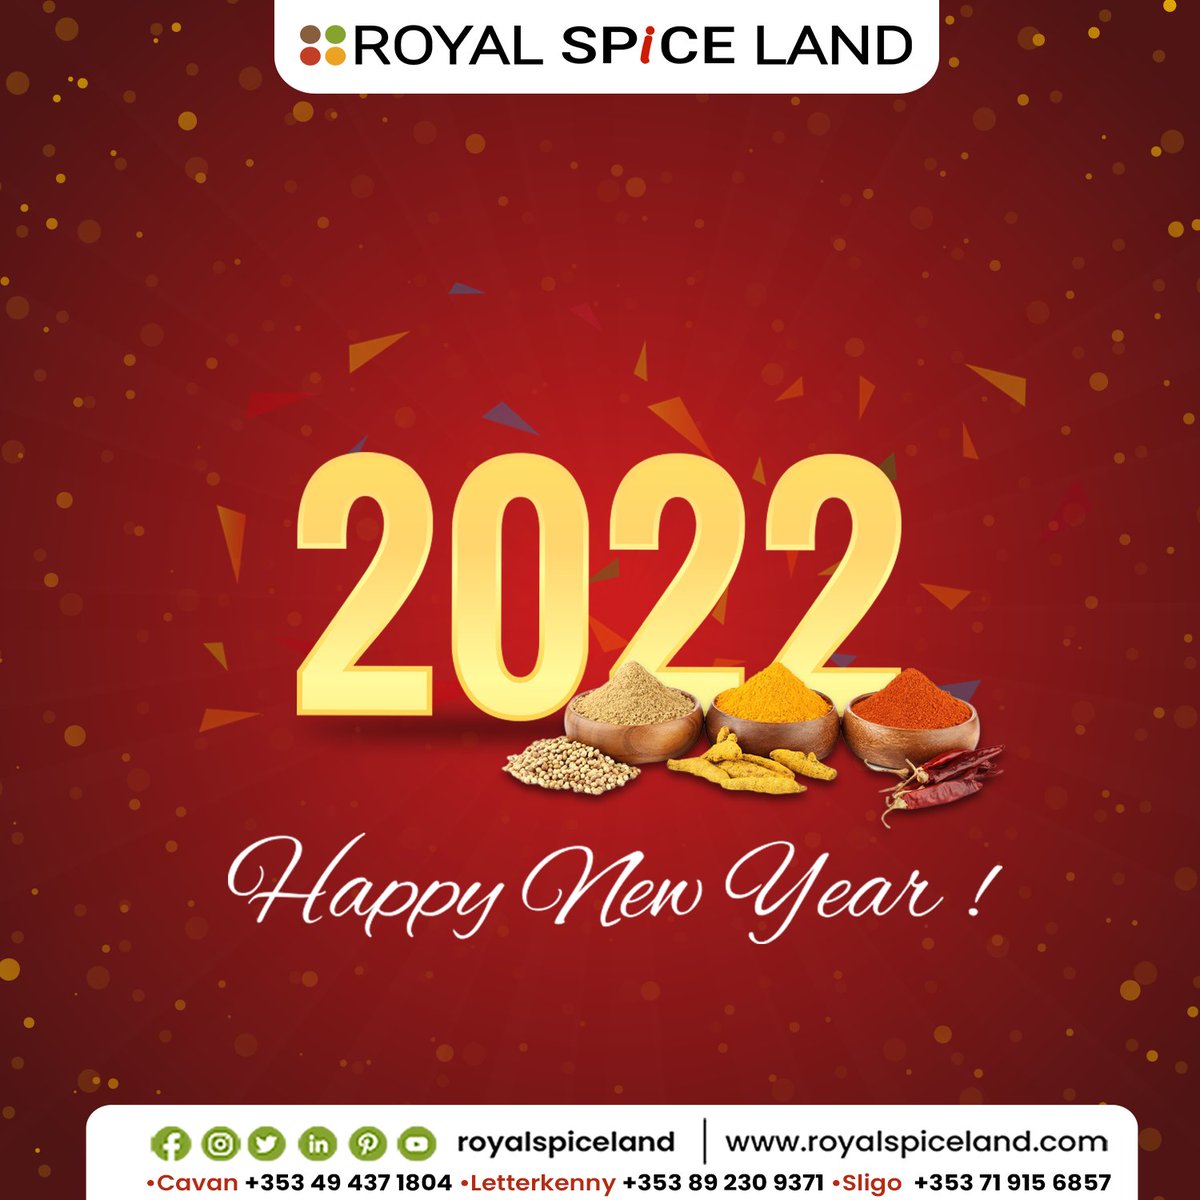 Let us have a happy new year with all the blessings and happiness
Happy New Year - 2022

#royalspiceland #sligo #cavan #letterkenny #happynewyear #newyear2022 #newyearseve